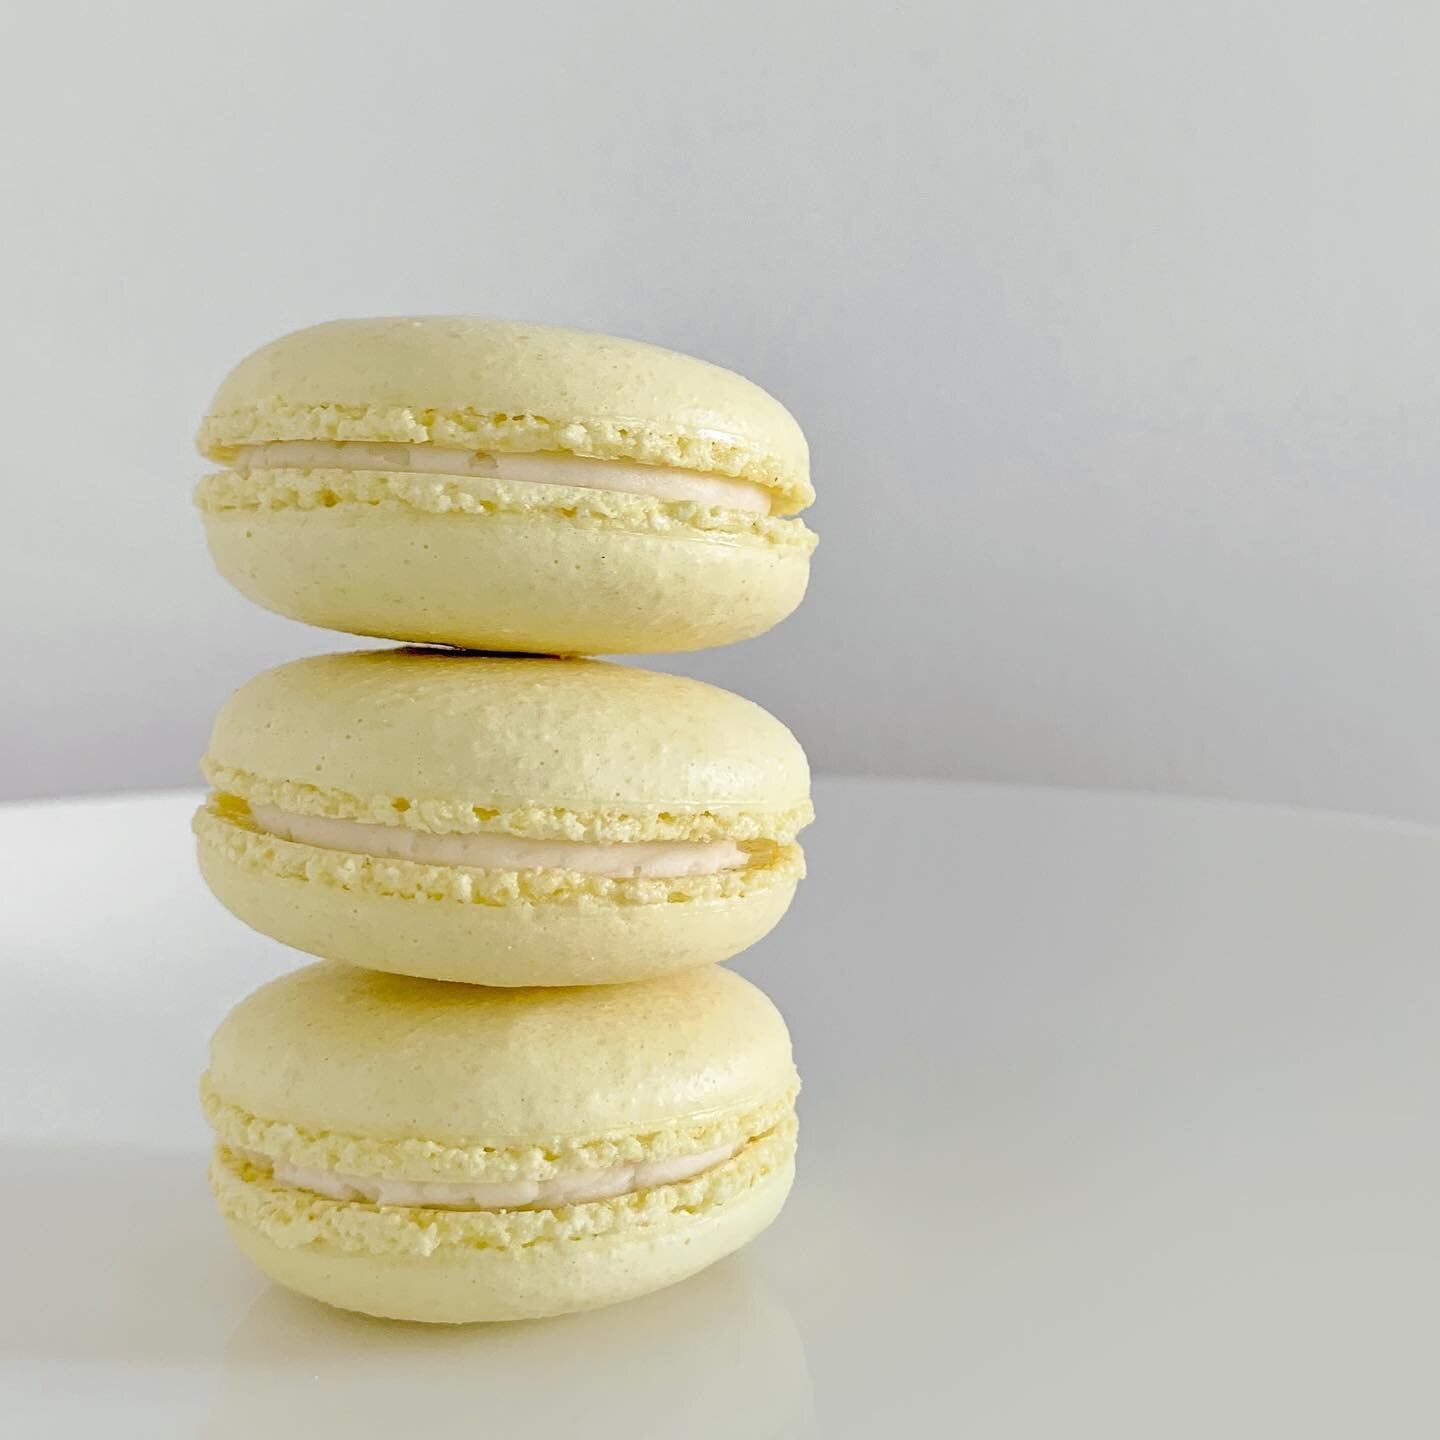 classic shells x lemon elderflower buttercream
.
.
We could all use a little bit of sunshine right now, so here are some sunny, lemony, elderflowery yellow macarons. This very snowy and cold winter is beginning to overstay its welcome here in Chicago